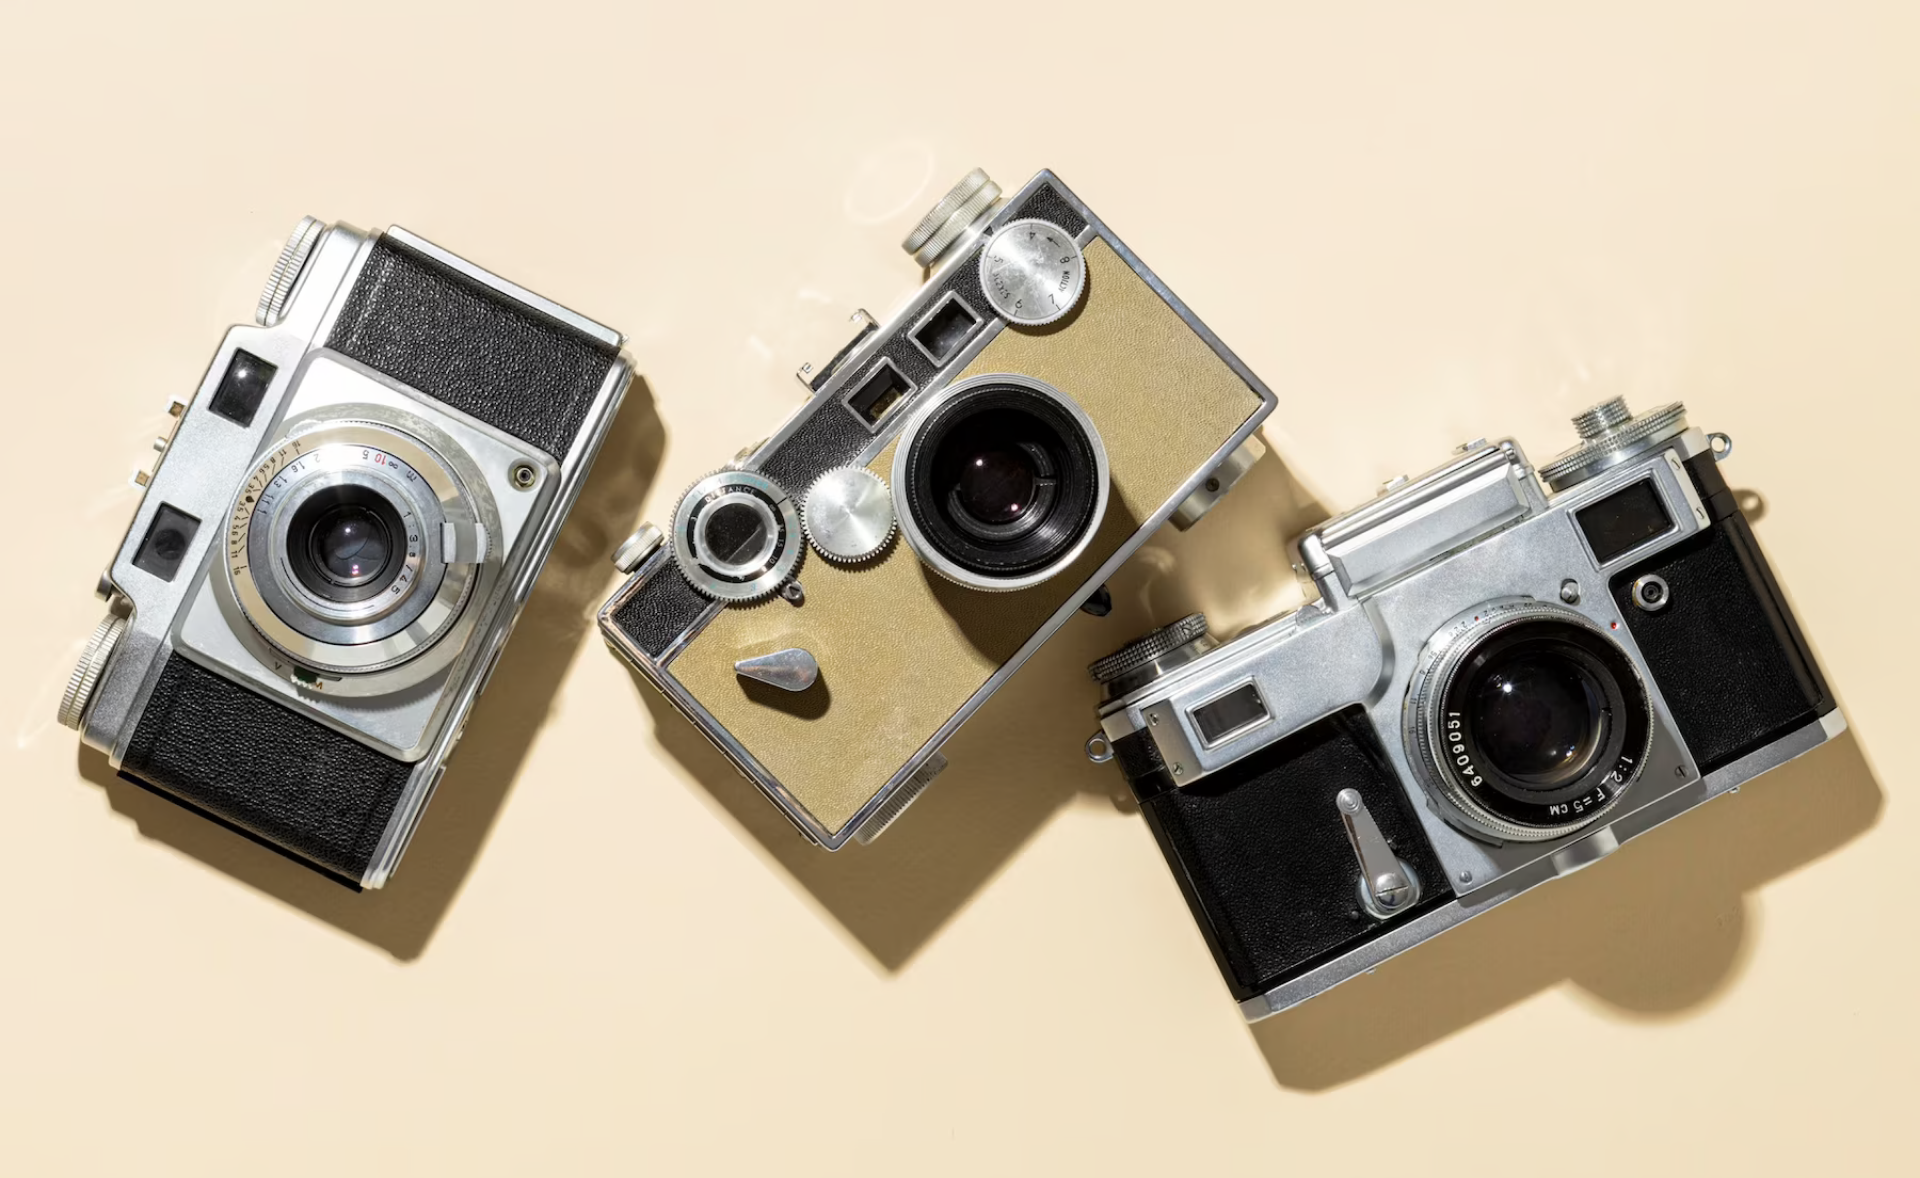 25 Ideas of What You Should Do With That Old Camera Collecting